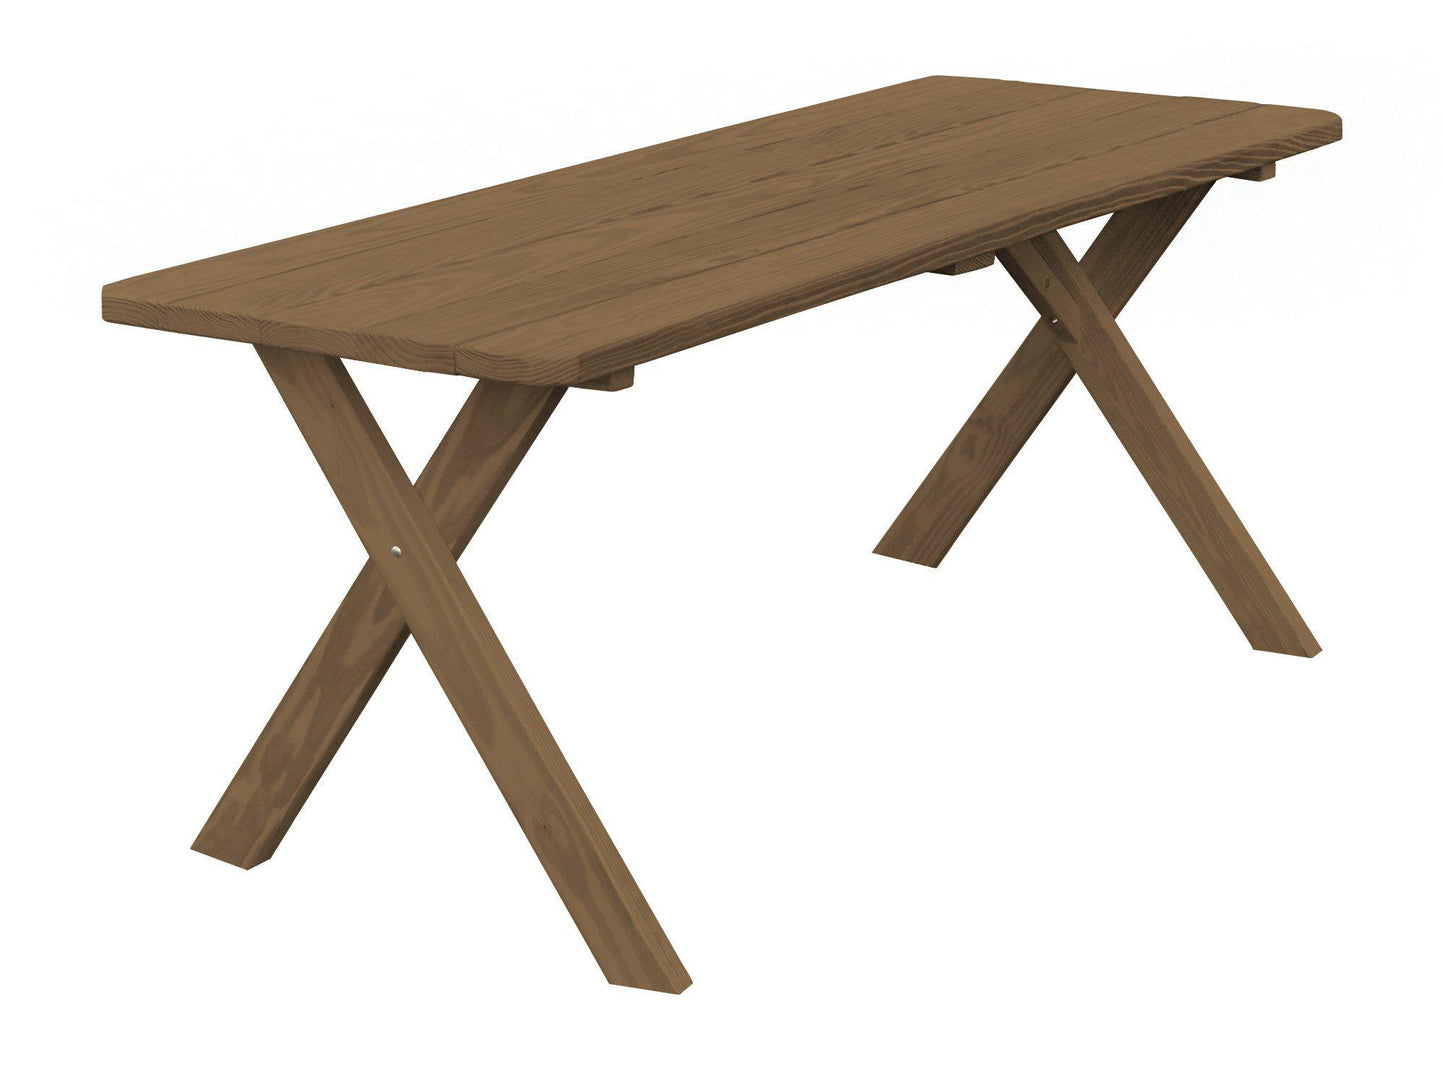 A&L Furniture Co. Pressure Treated Pine 6' Cross-leg Table Only - LEAD TIME TO SHIP 10 BUSINESS DAYS